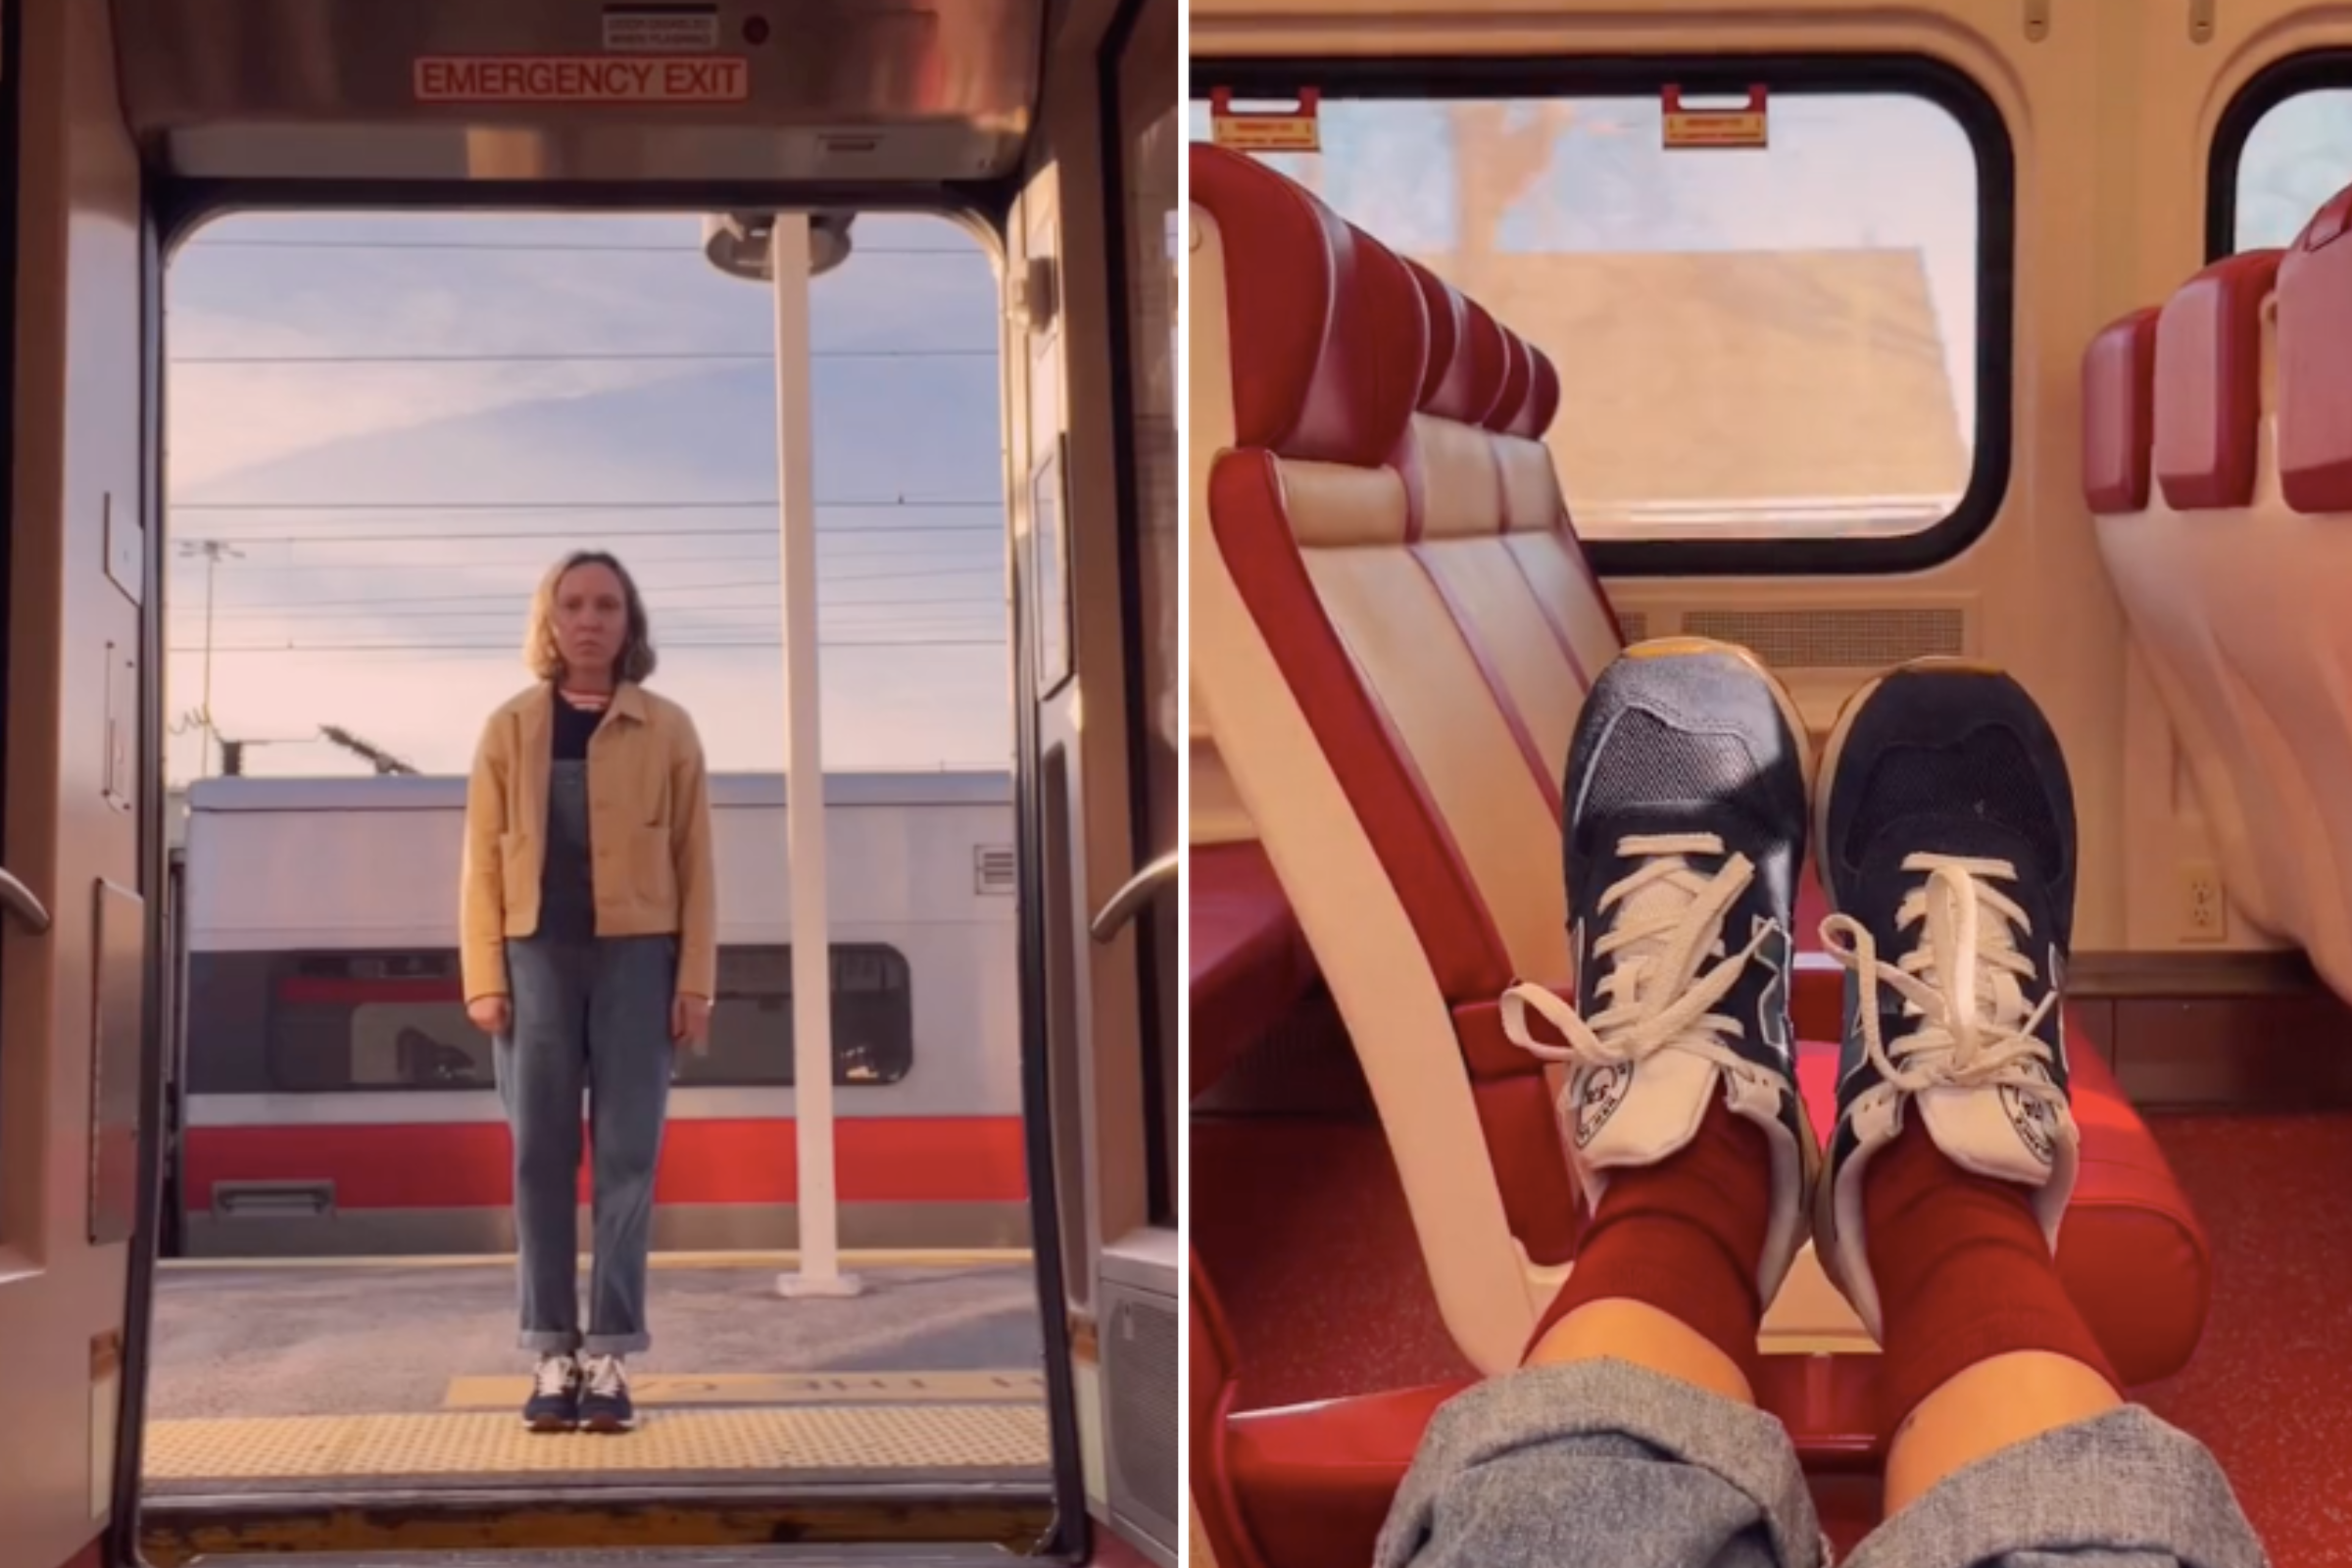 7 WES ANDERSON Style Shots in 3 Minutes 